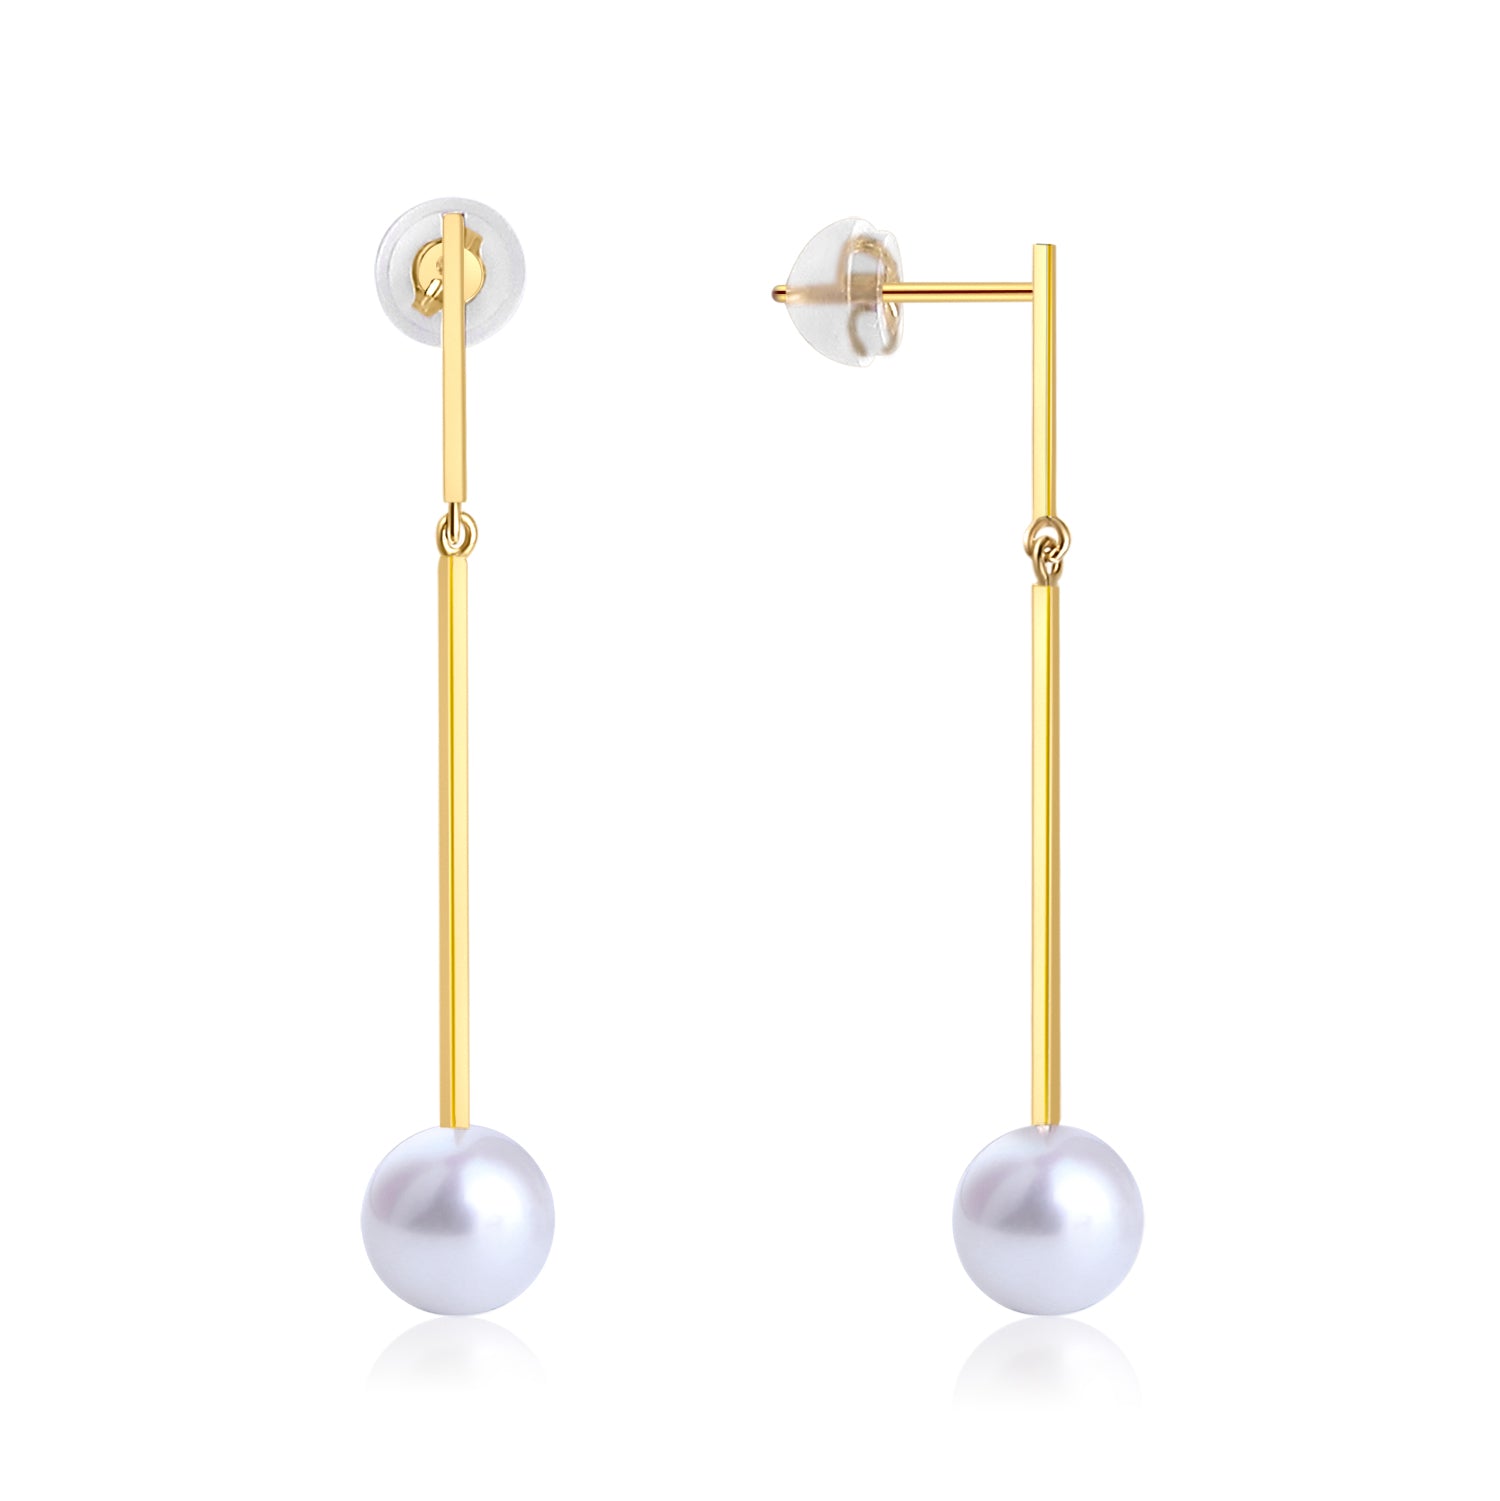 18K YELLOW GOLD EARRINGS WITH 6.5-7MM ROUND SHAPE AKOYA PEARL - Woment Designer Jewelry